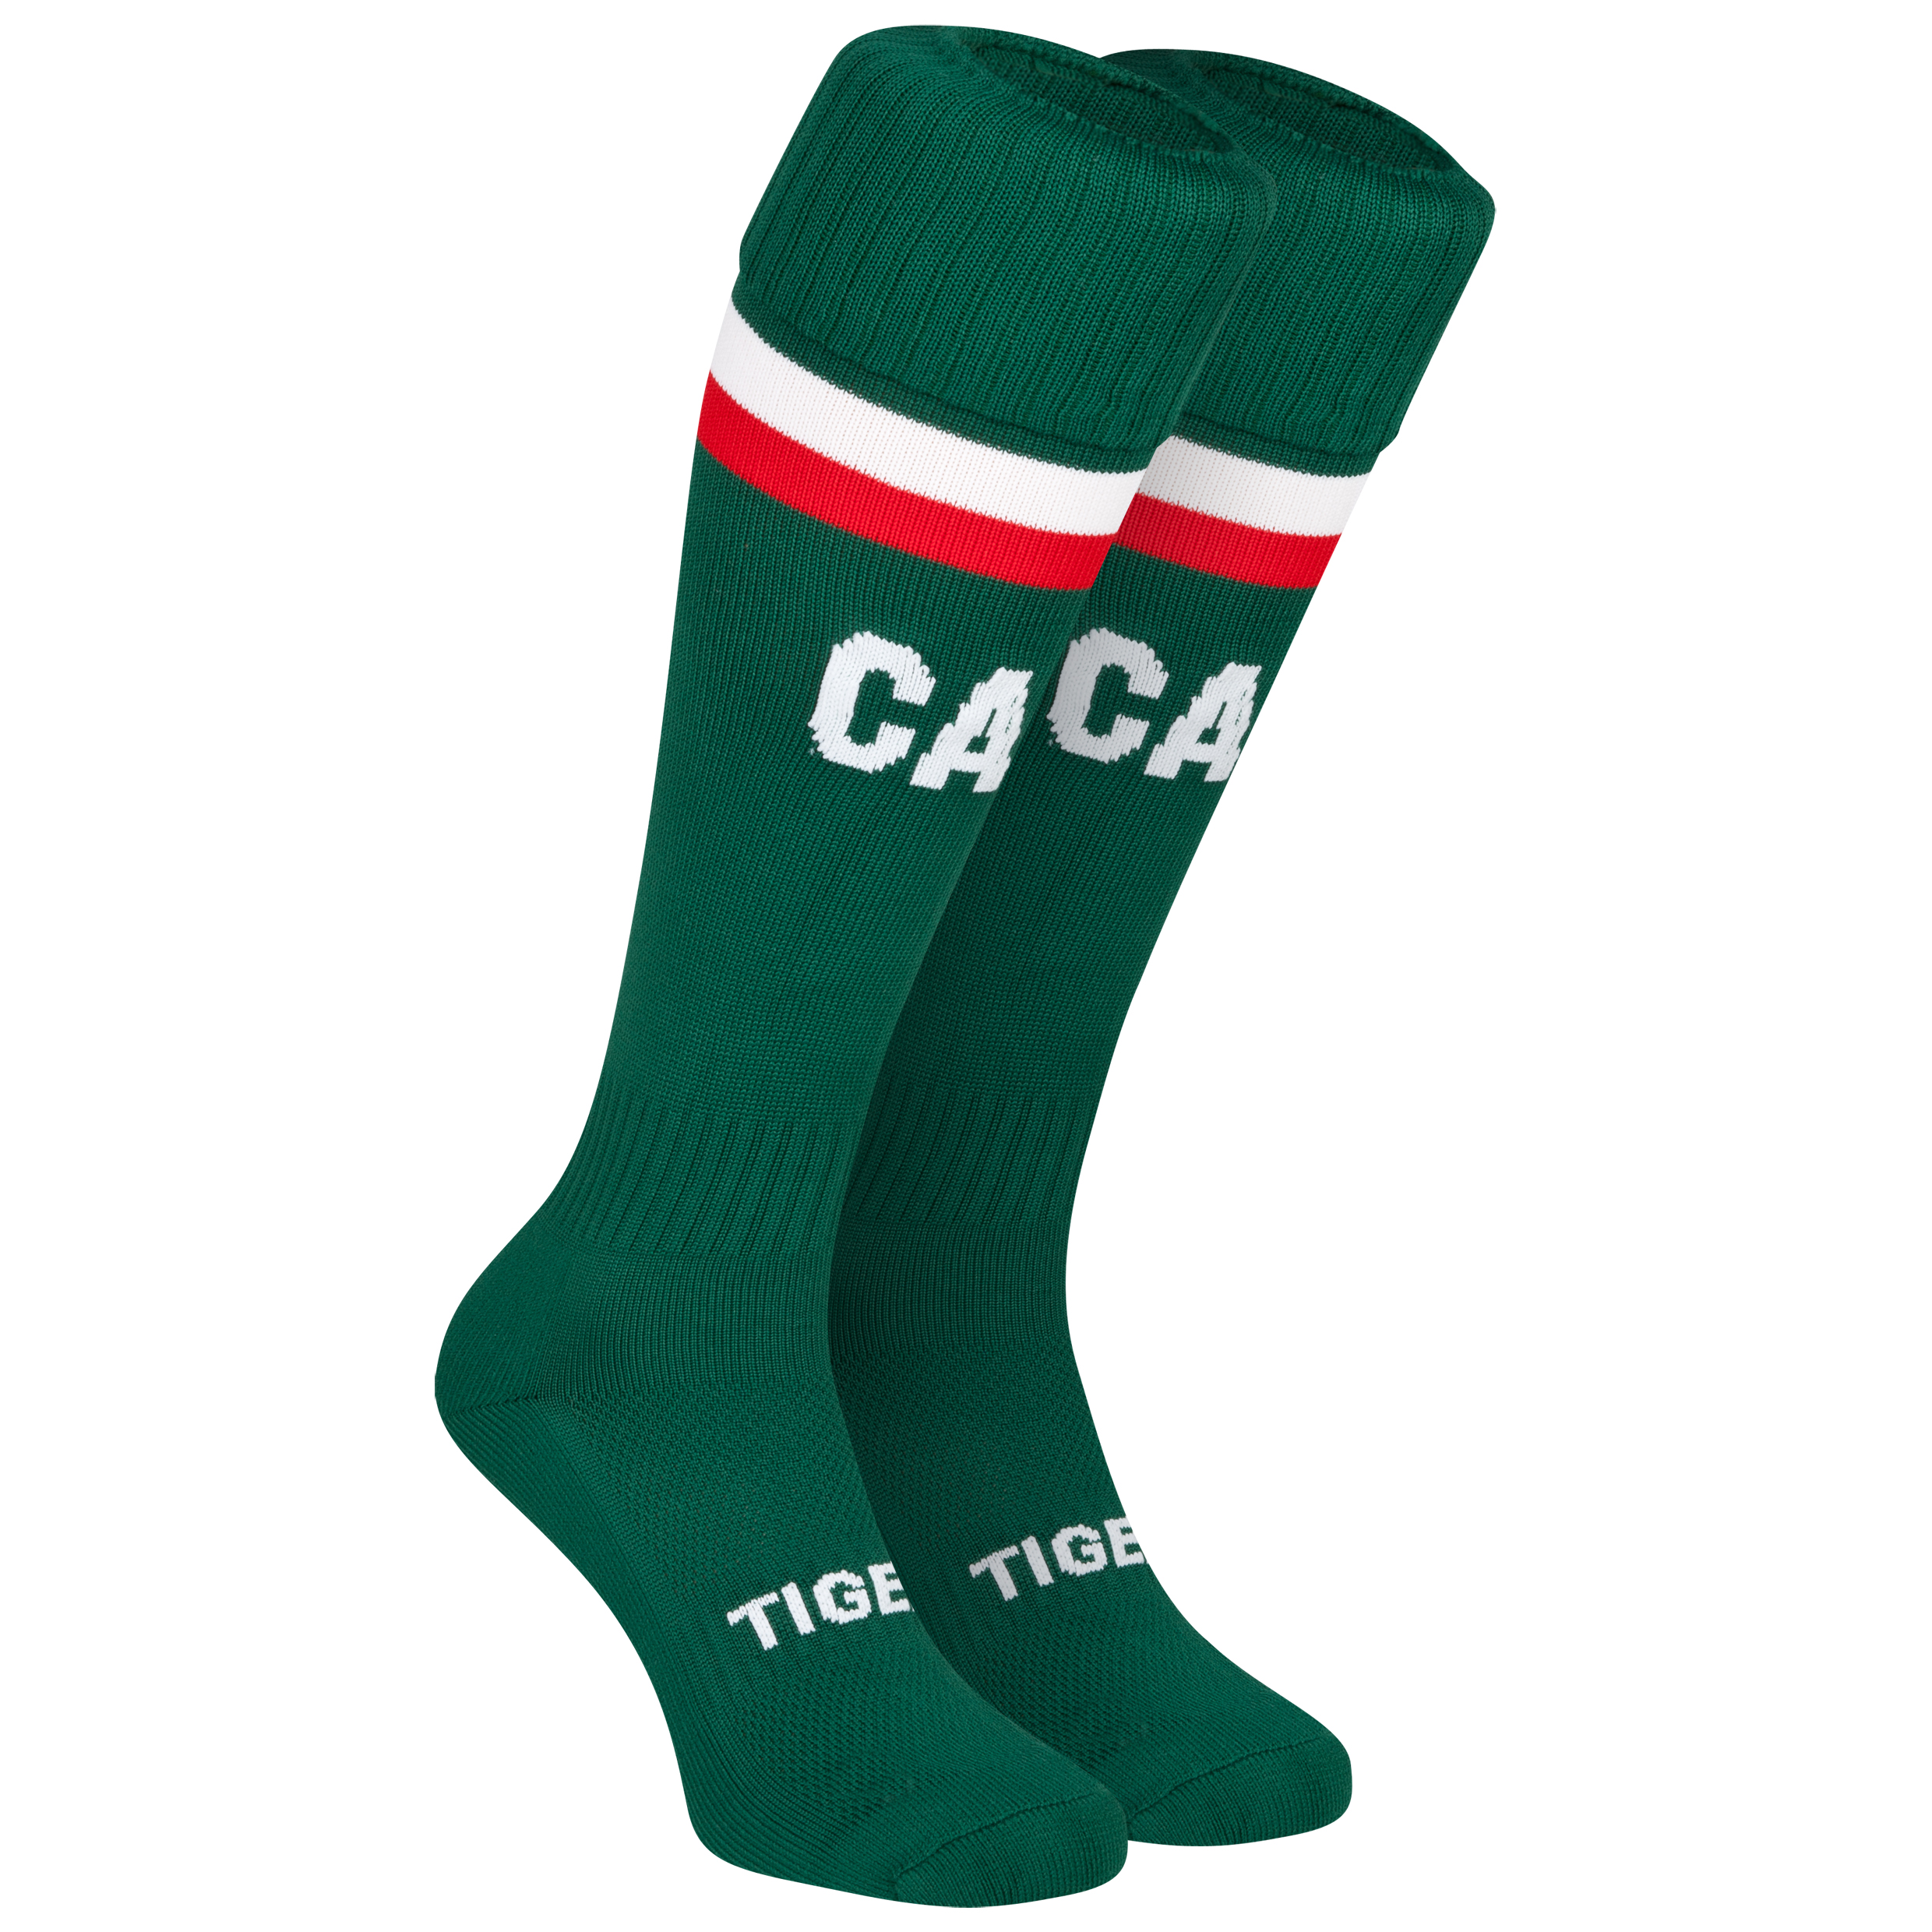 Leicester Tigers Home Socks 2013/14 - Junior